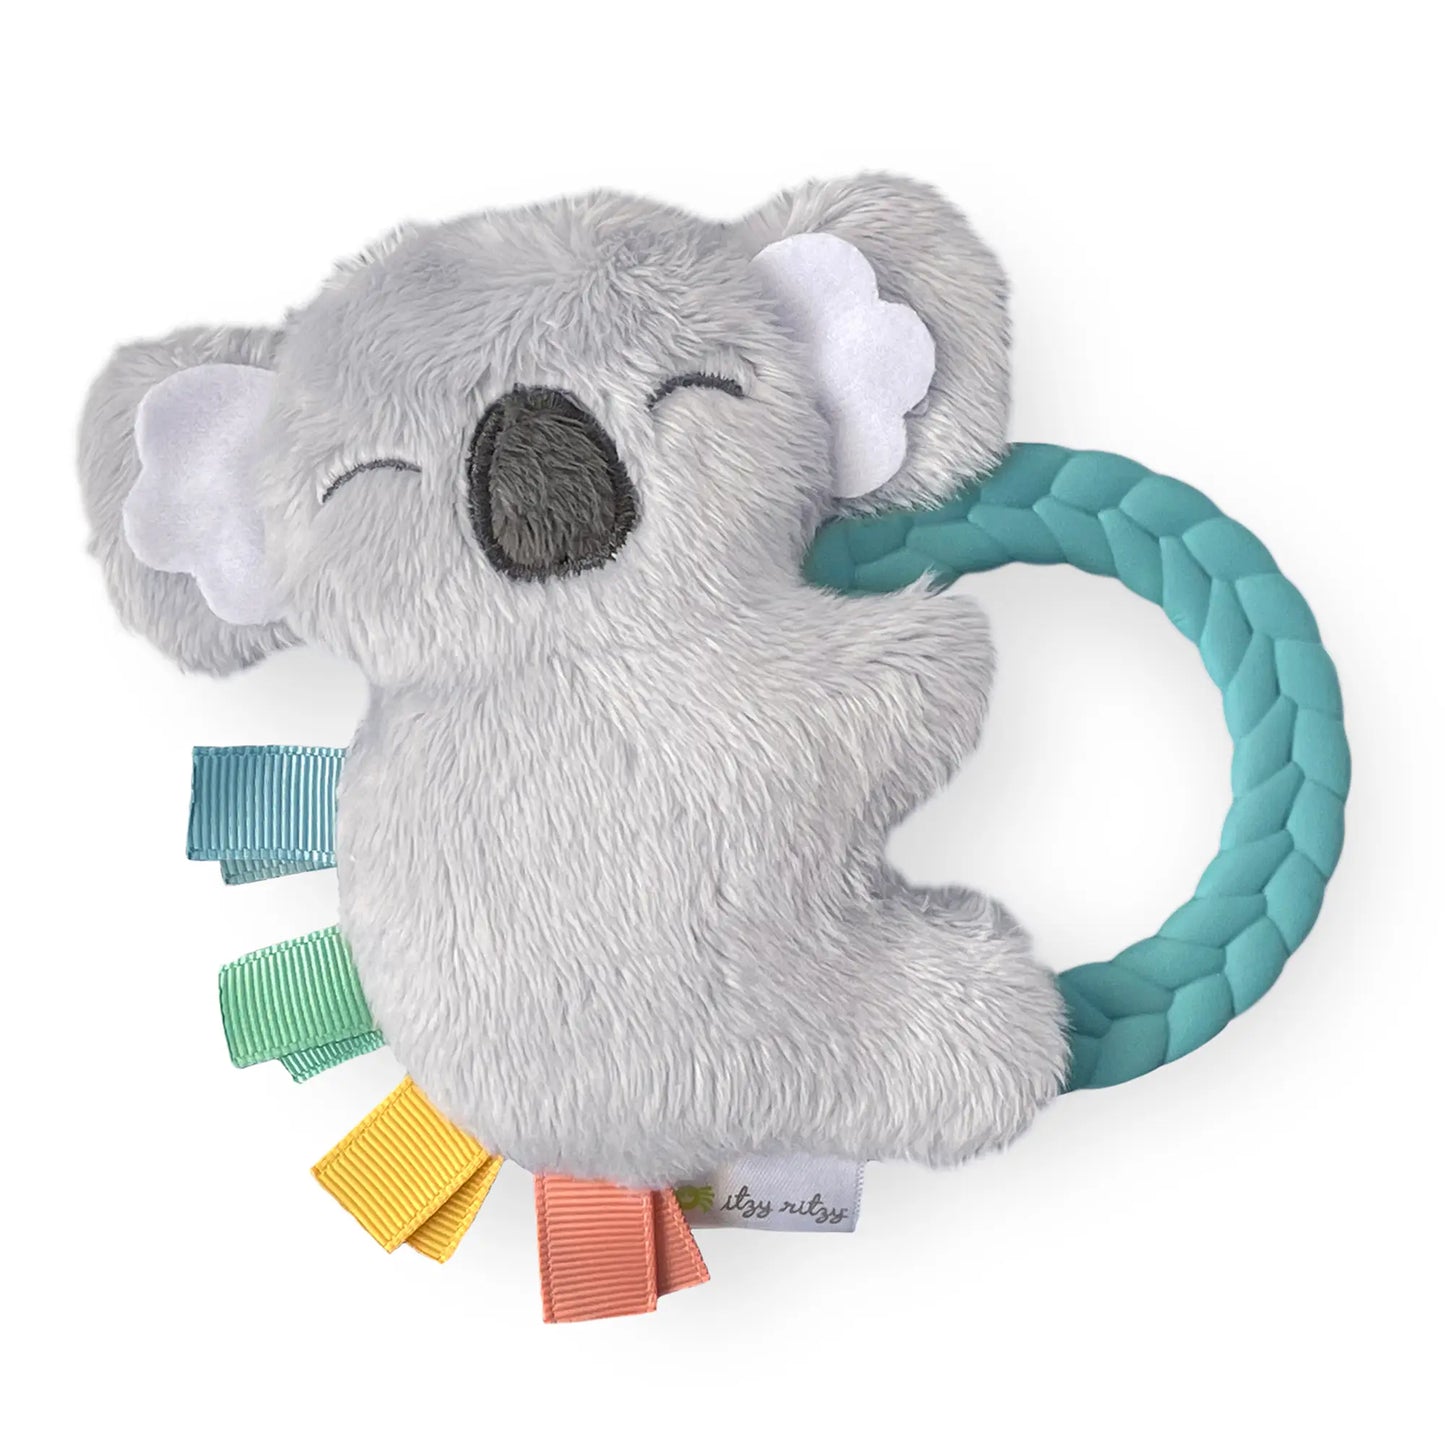 Itzy Ritzy Rattle Pal Plush Rattle Pal with Teether